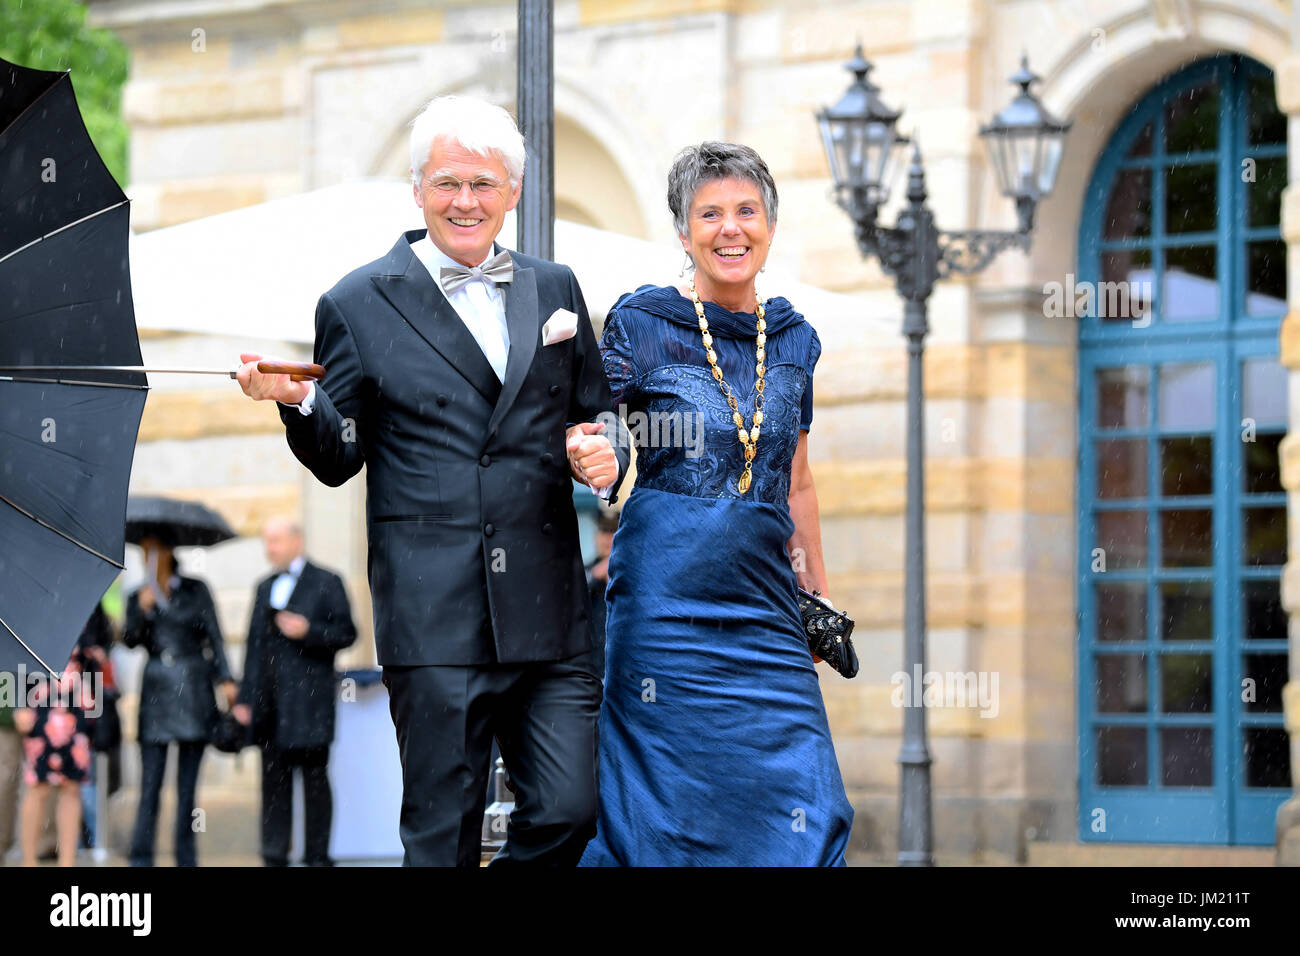 Bayreuth, Germany. 25th July, 2017. The mayor of Bayreuth, Brigitte Merk-Erbe (R) and her husband Thomas Erbe arrive for the opening of the festival in Bayreuth, Germany, 25 July 2017. The Richard Wagner Festival will be opened with the opera "The Master-Singers of Nuremberg". Photo: Tobias Hase/dpa/Alamy Live News Stock Photo